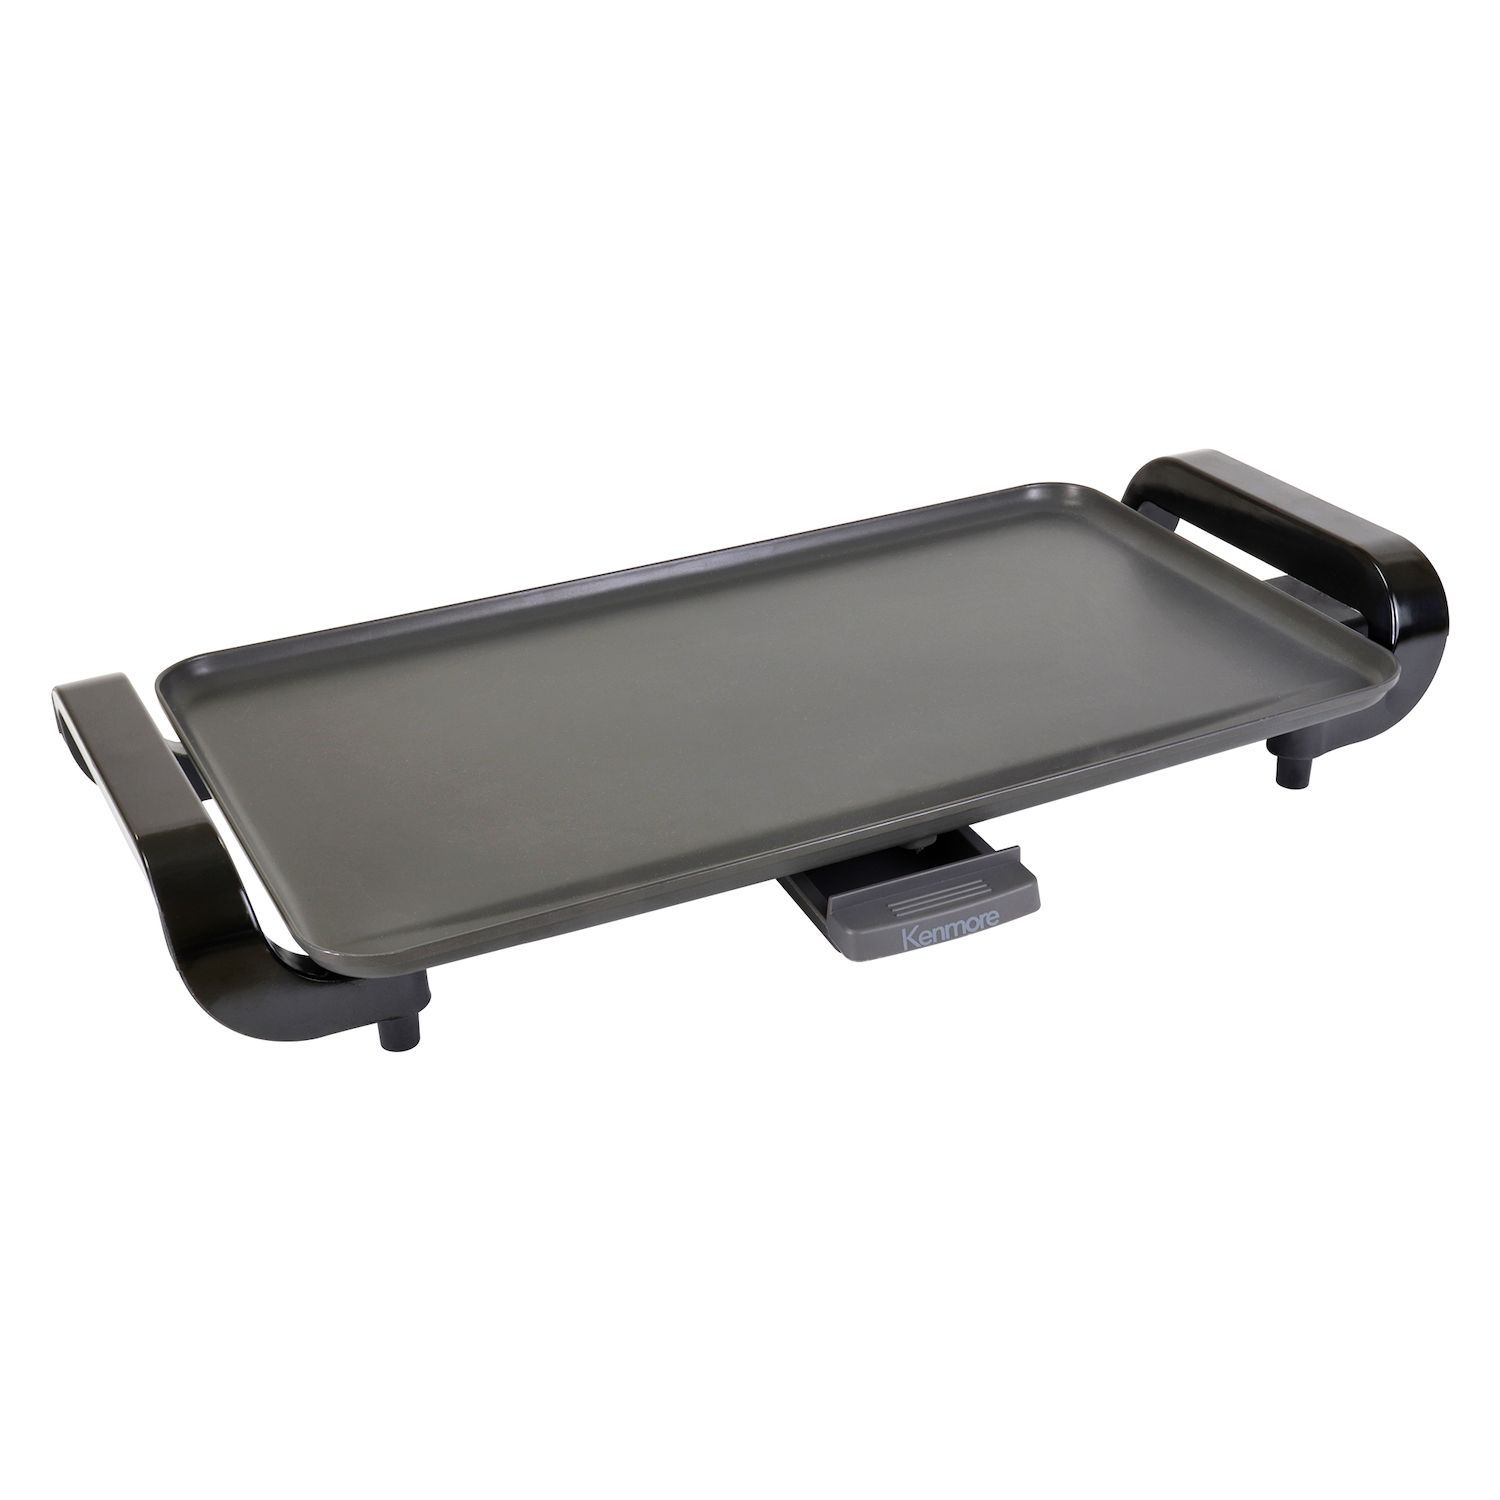 Bring the grill inside this fall, Dash Everyday Deluxe Griddle now $50  (Matching  low)